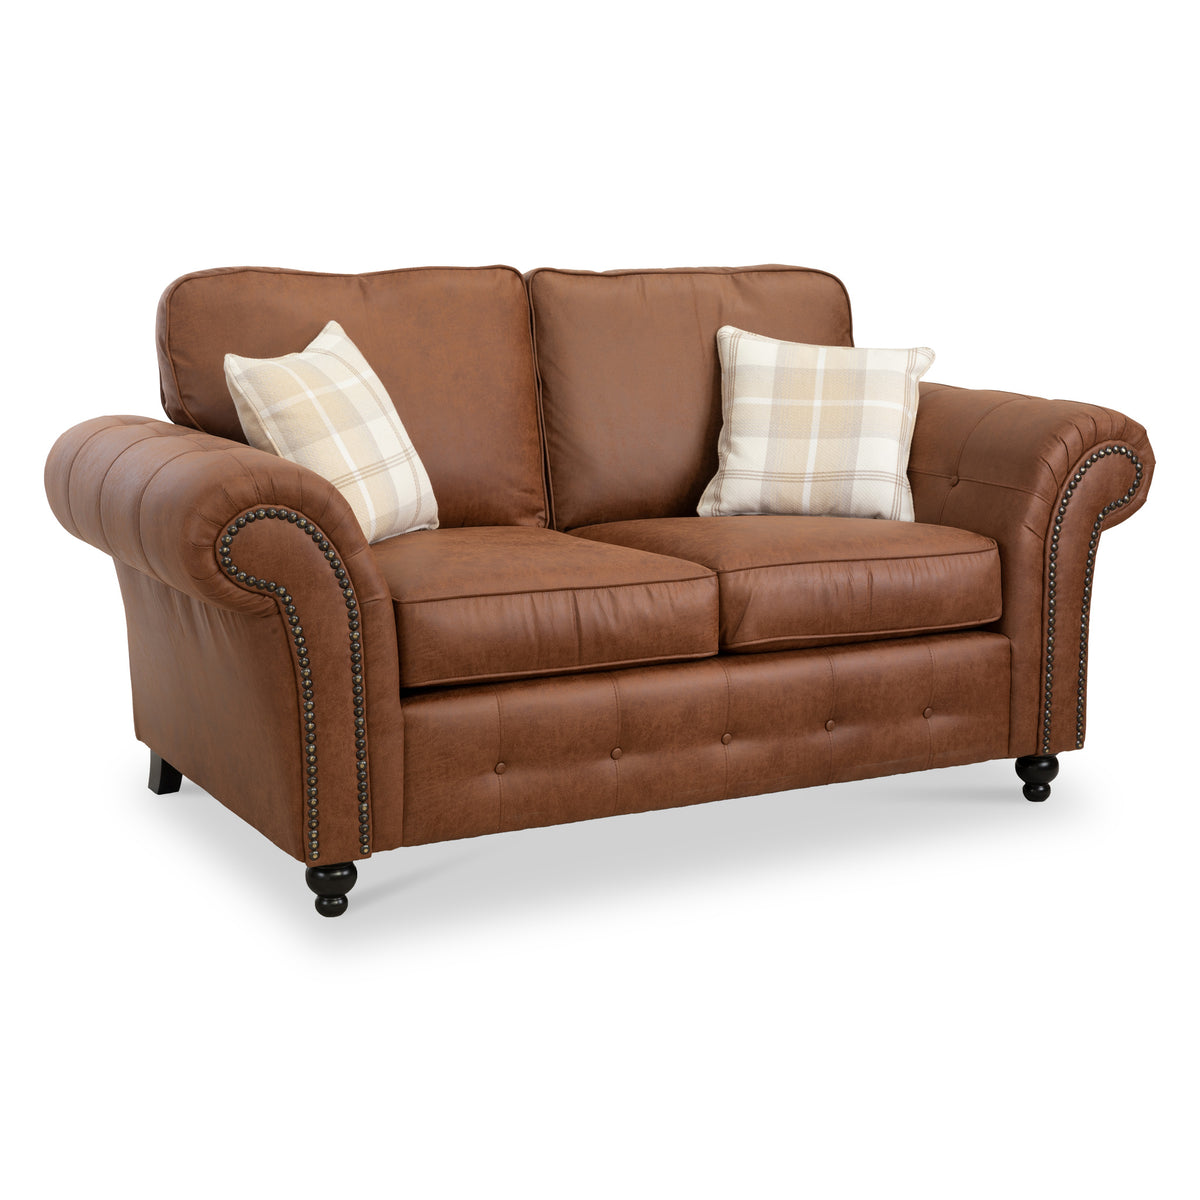 Edward Chocolate Faux Leather 2 Seater Sofa from Roseland Furniture